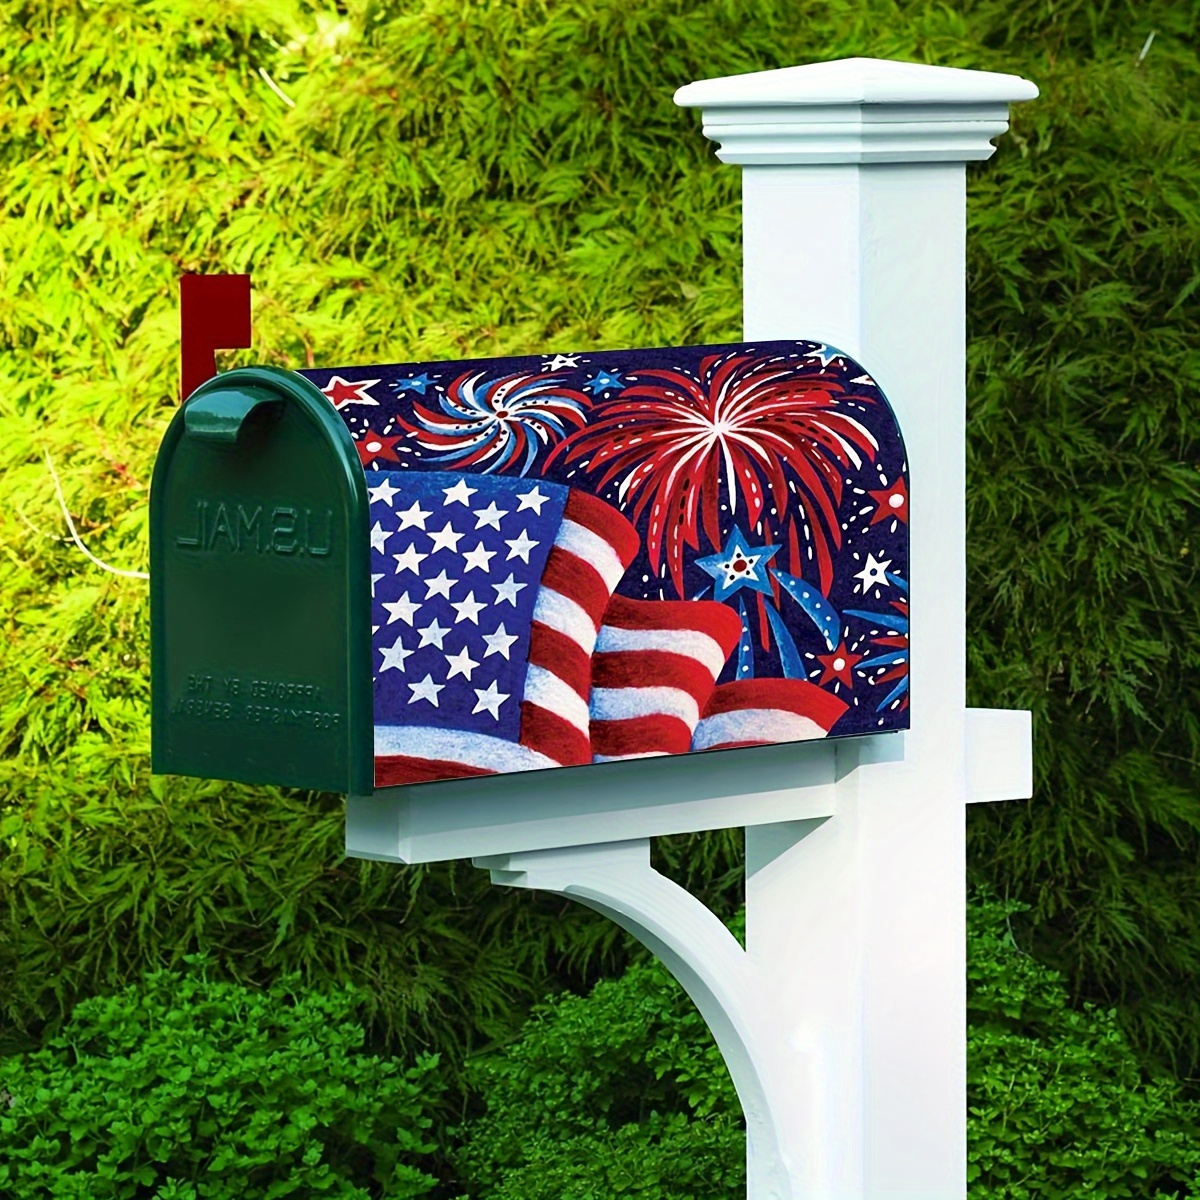 

1pc, Patriotic Magnetic Mailbox Cover, Jit Independence Day Themed, Outdoor Yard Decor, Star-spangled Banner & Fireworks Design, Fits Standard Mailboxes, 20.8x18.11 Inches, Seasonal Spring Decor